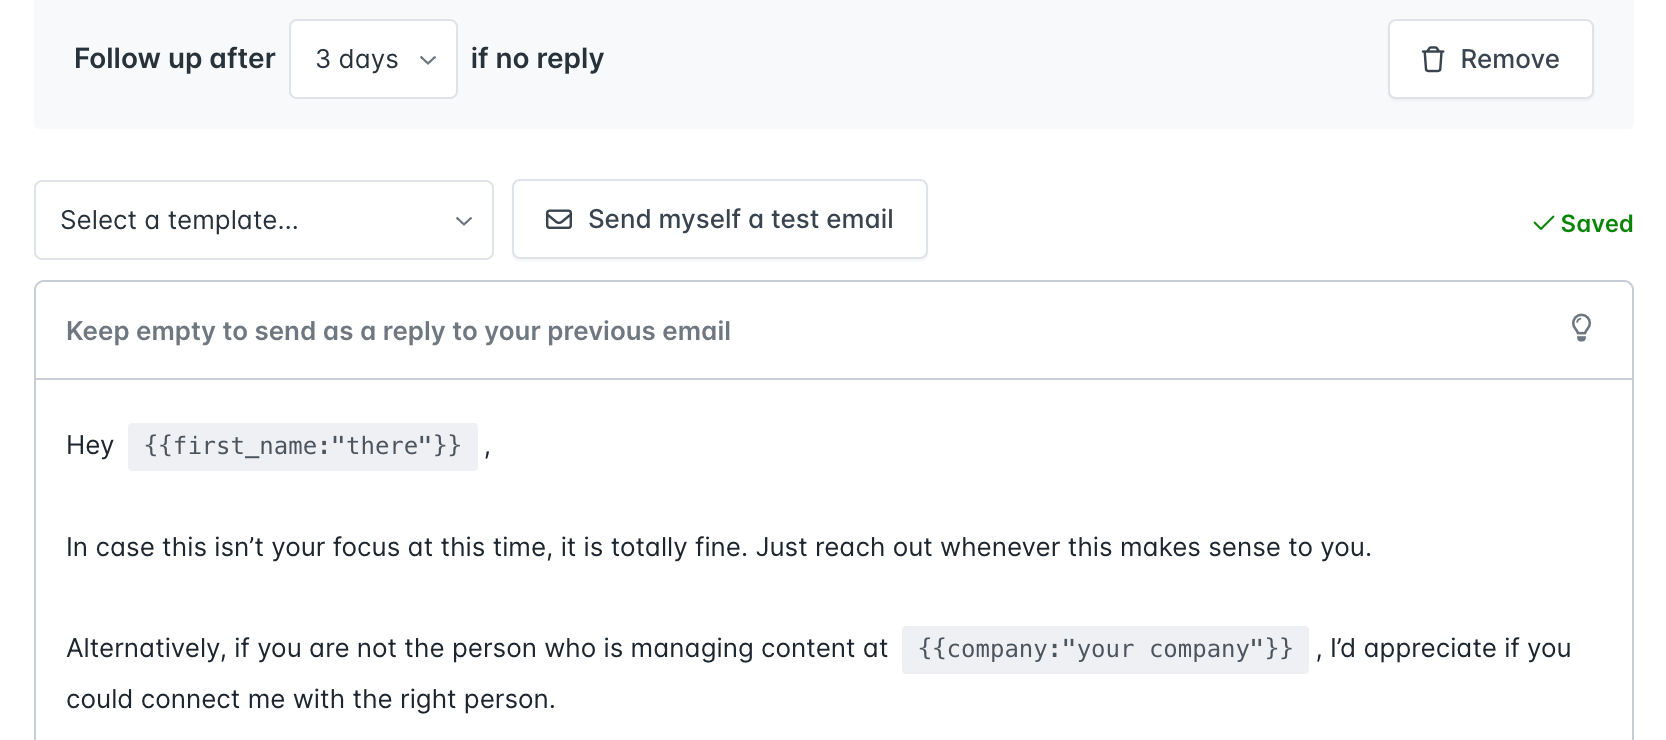 Rejection-Then-Retreat: How To Change Your CTA After No Reply